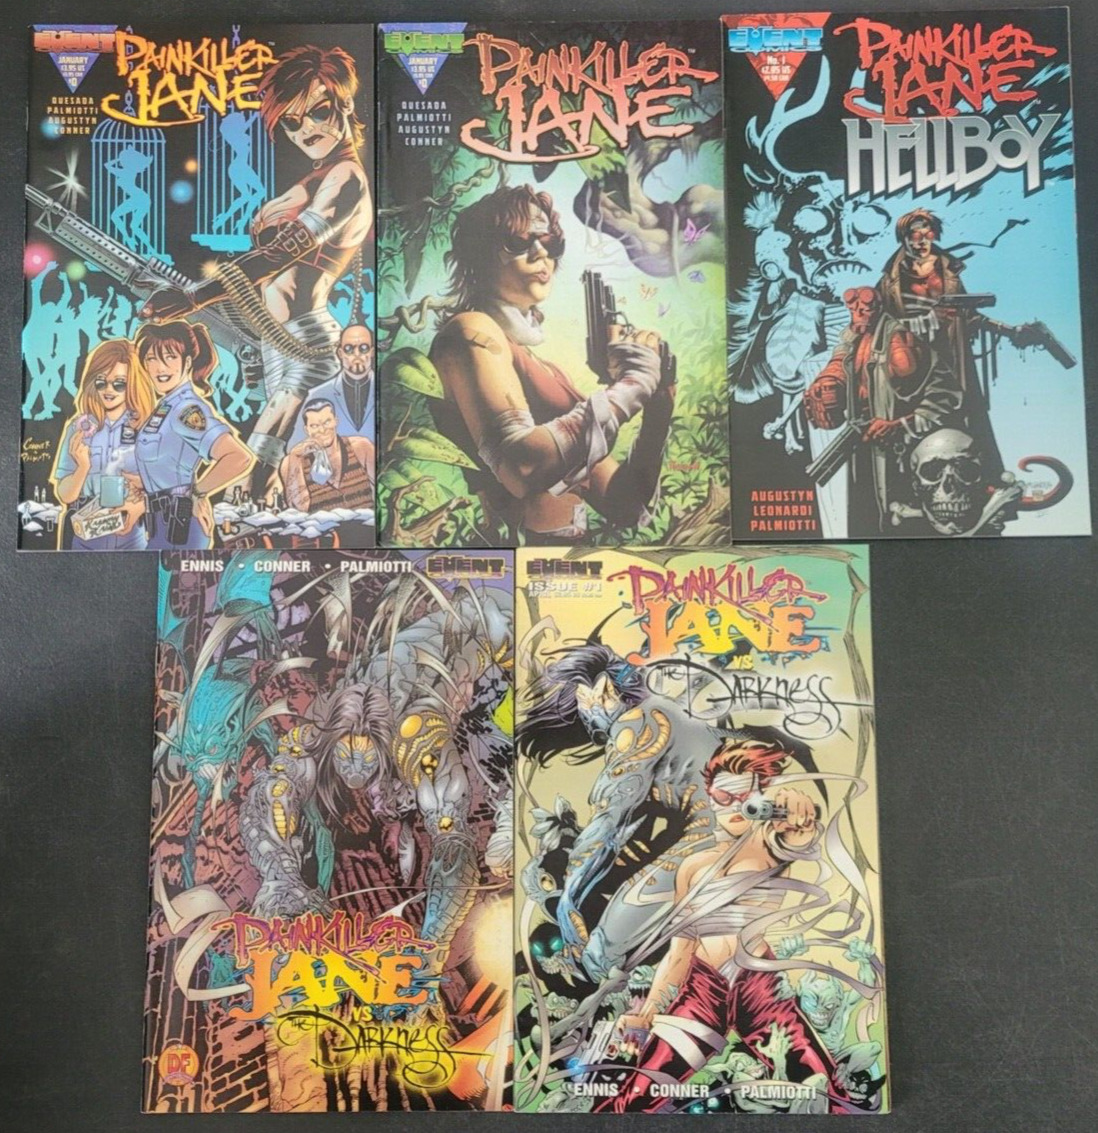 PAINKILLER JANE SET OF 13 ISSUES DYNAMITE/EVENT COMICS HELLBOY DARKNESS DF